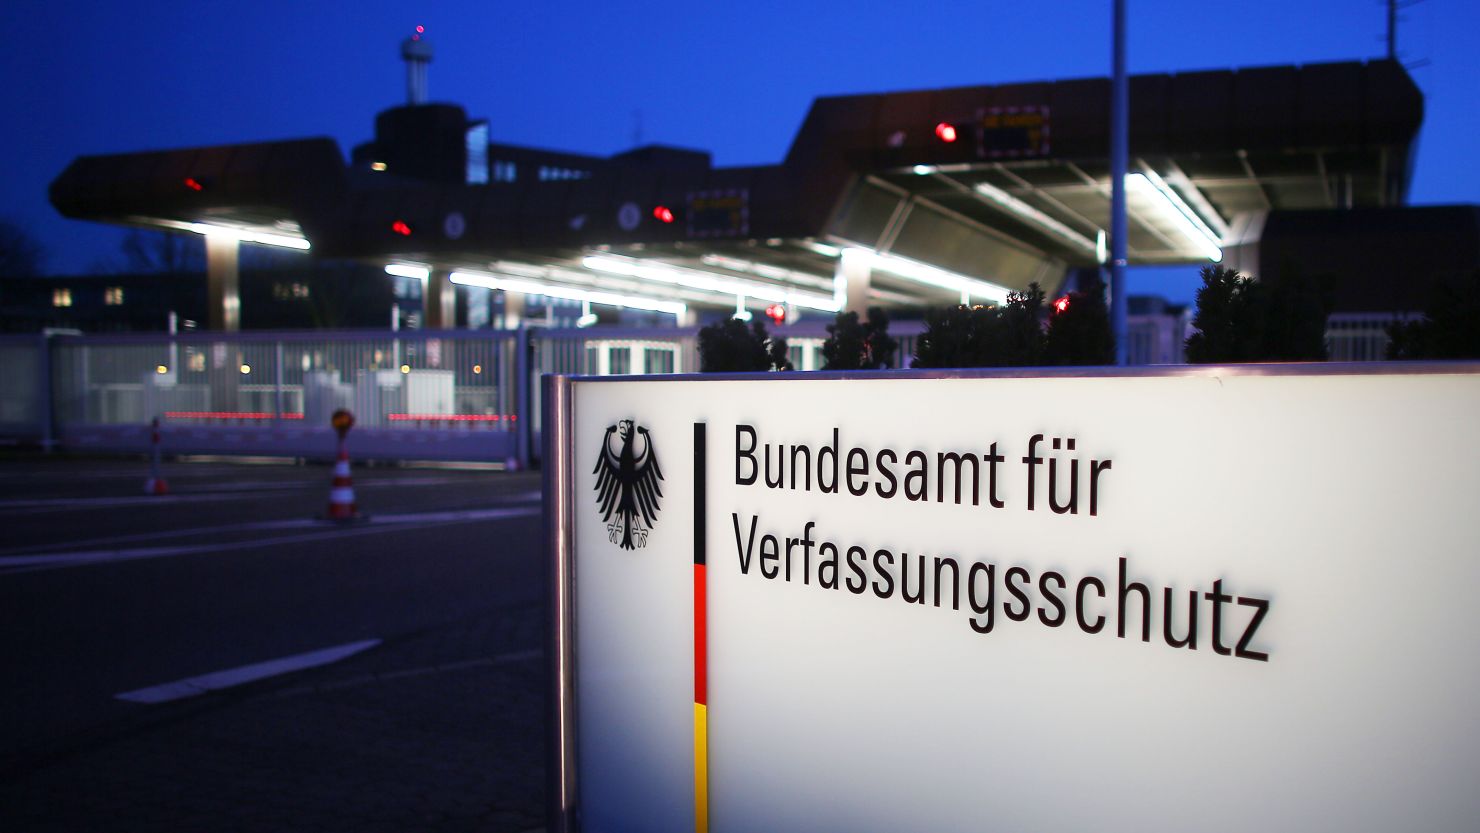 A man working at the German Federal Office for the Protection of the Constitution (BfD) has been arrested. 